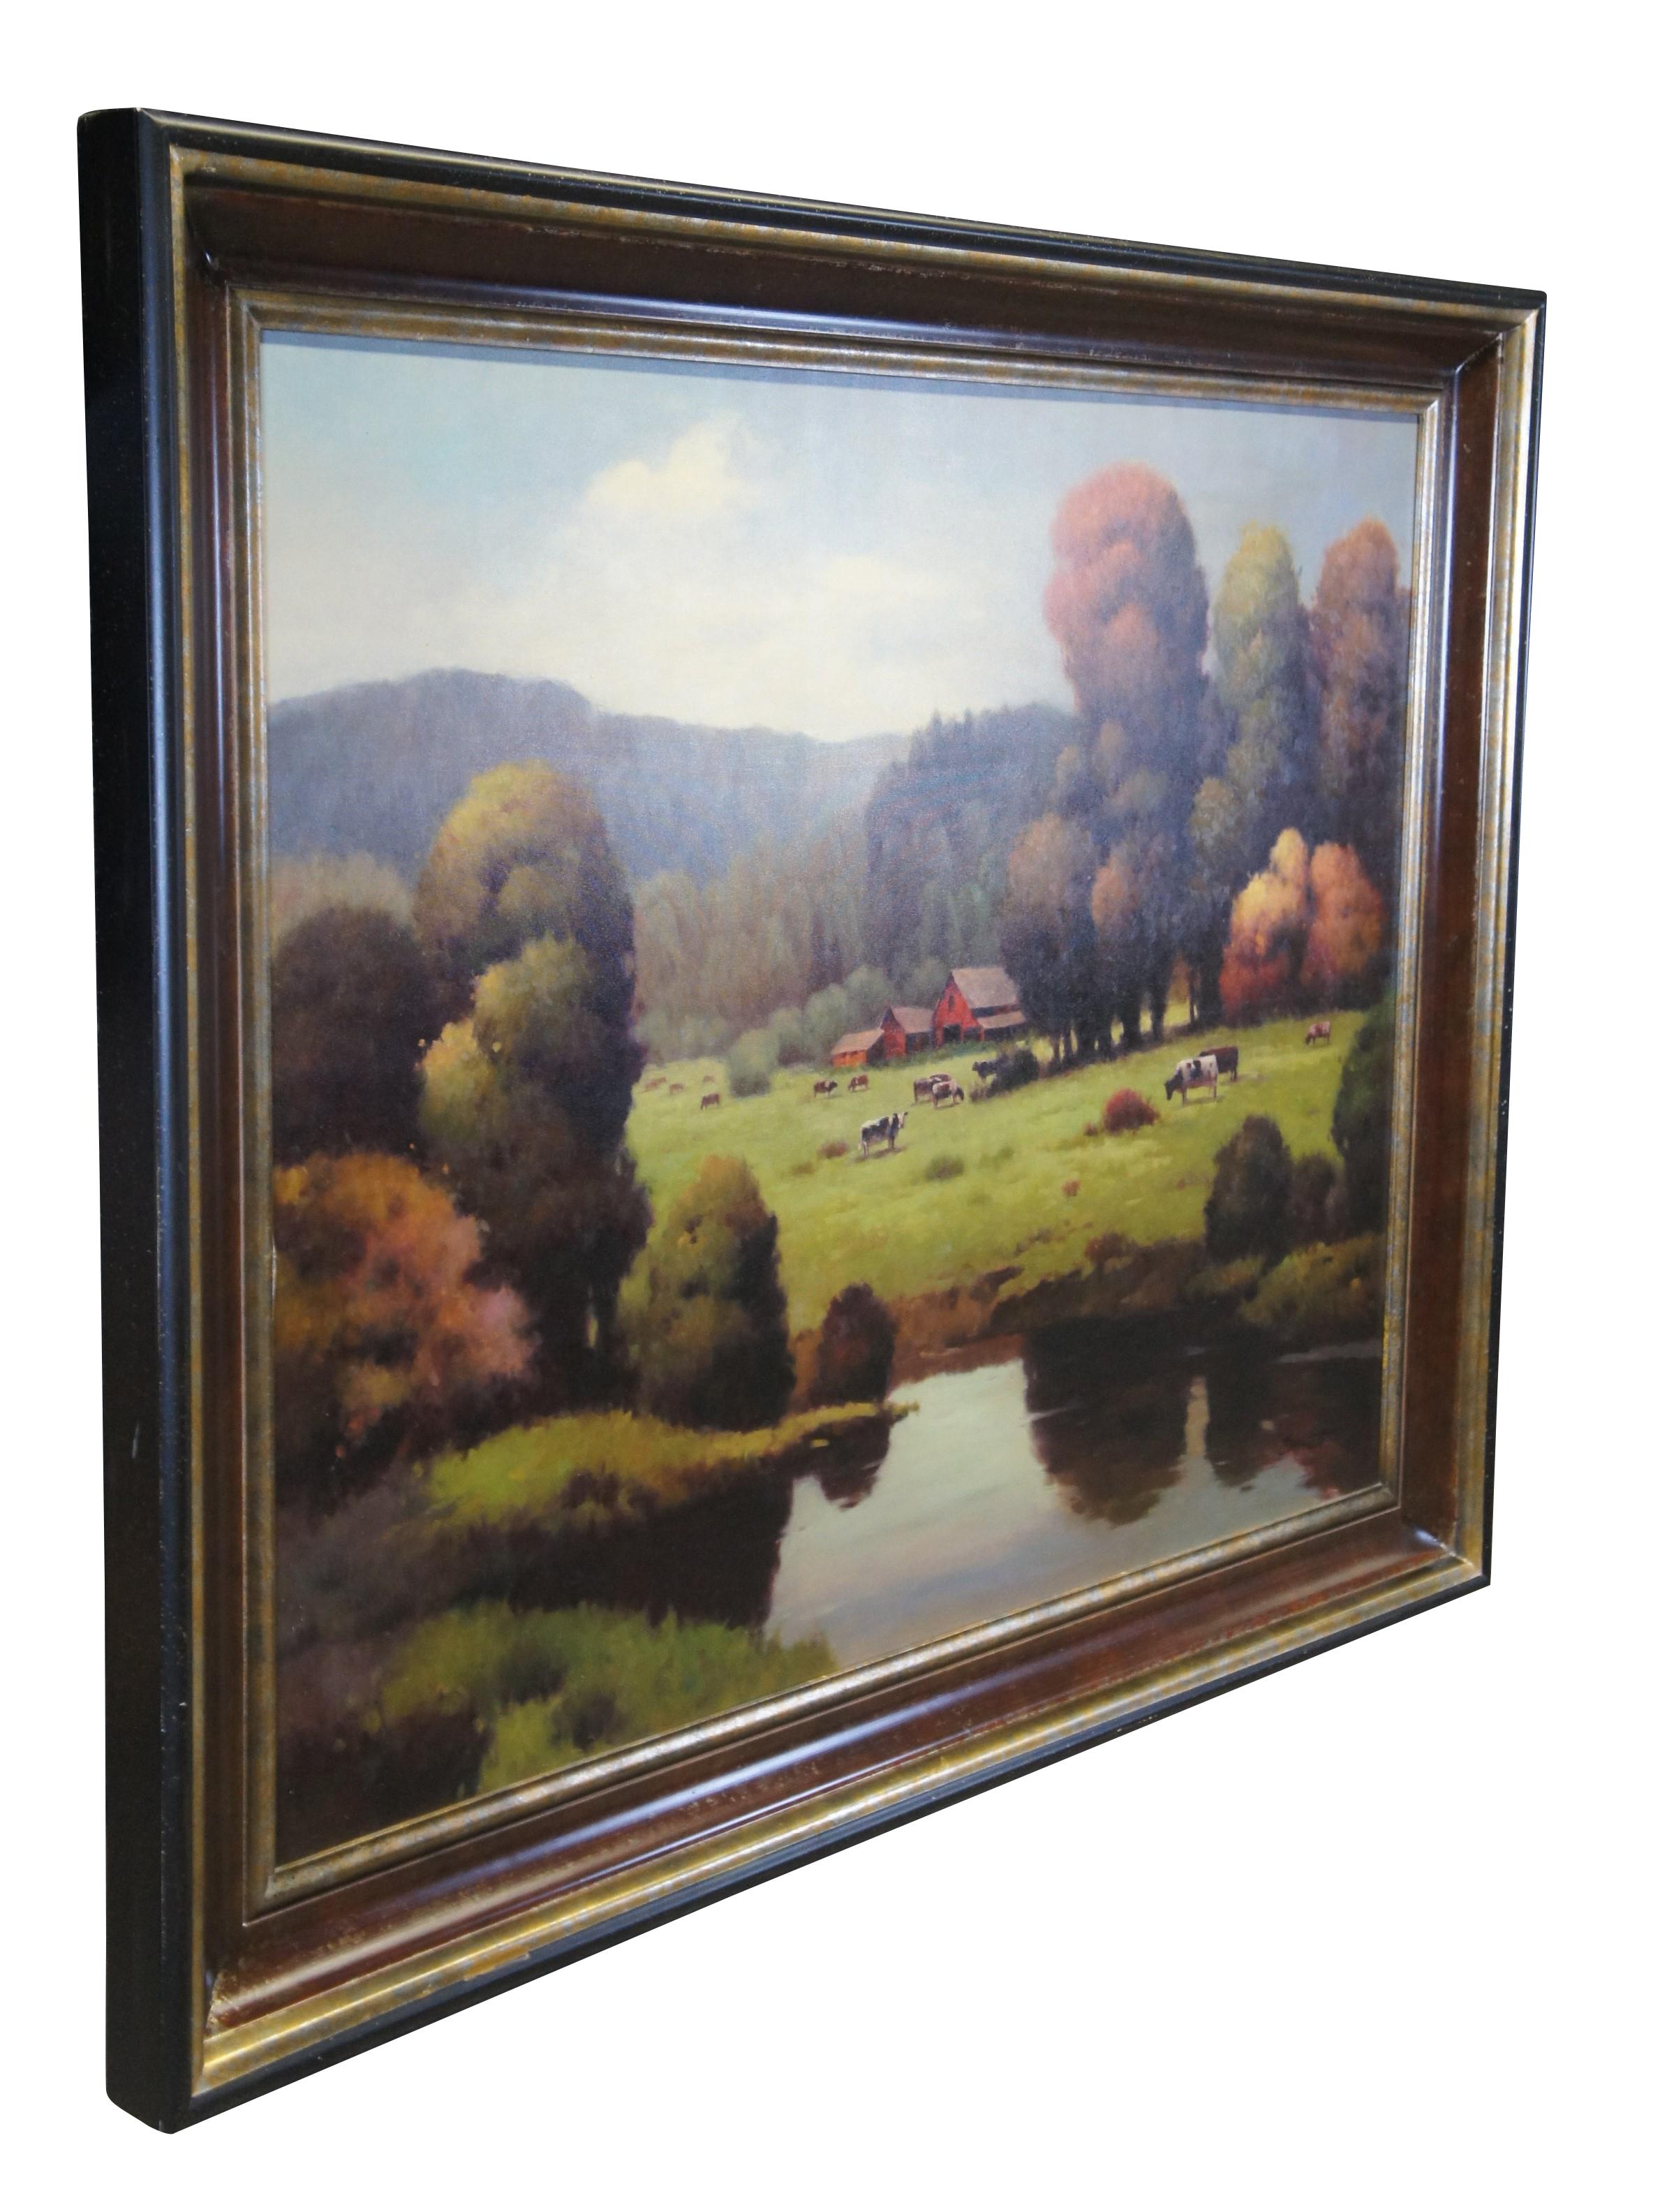 A very large and impressive Autumn landscape oil painting on canvas featuring a densly wooded countryside farm with cows grazing in the fields and red barns / farmhouses.  Signed lower right by Bonnatt.  From the private collection of Gene